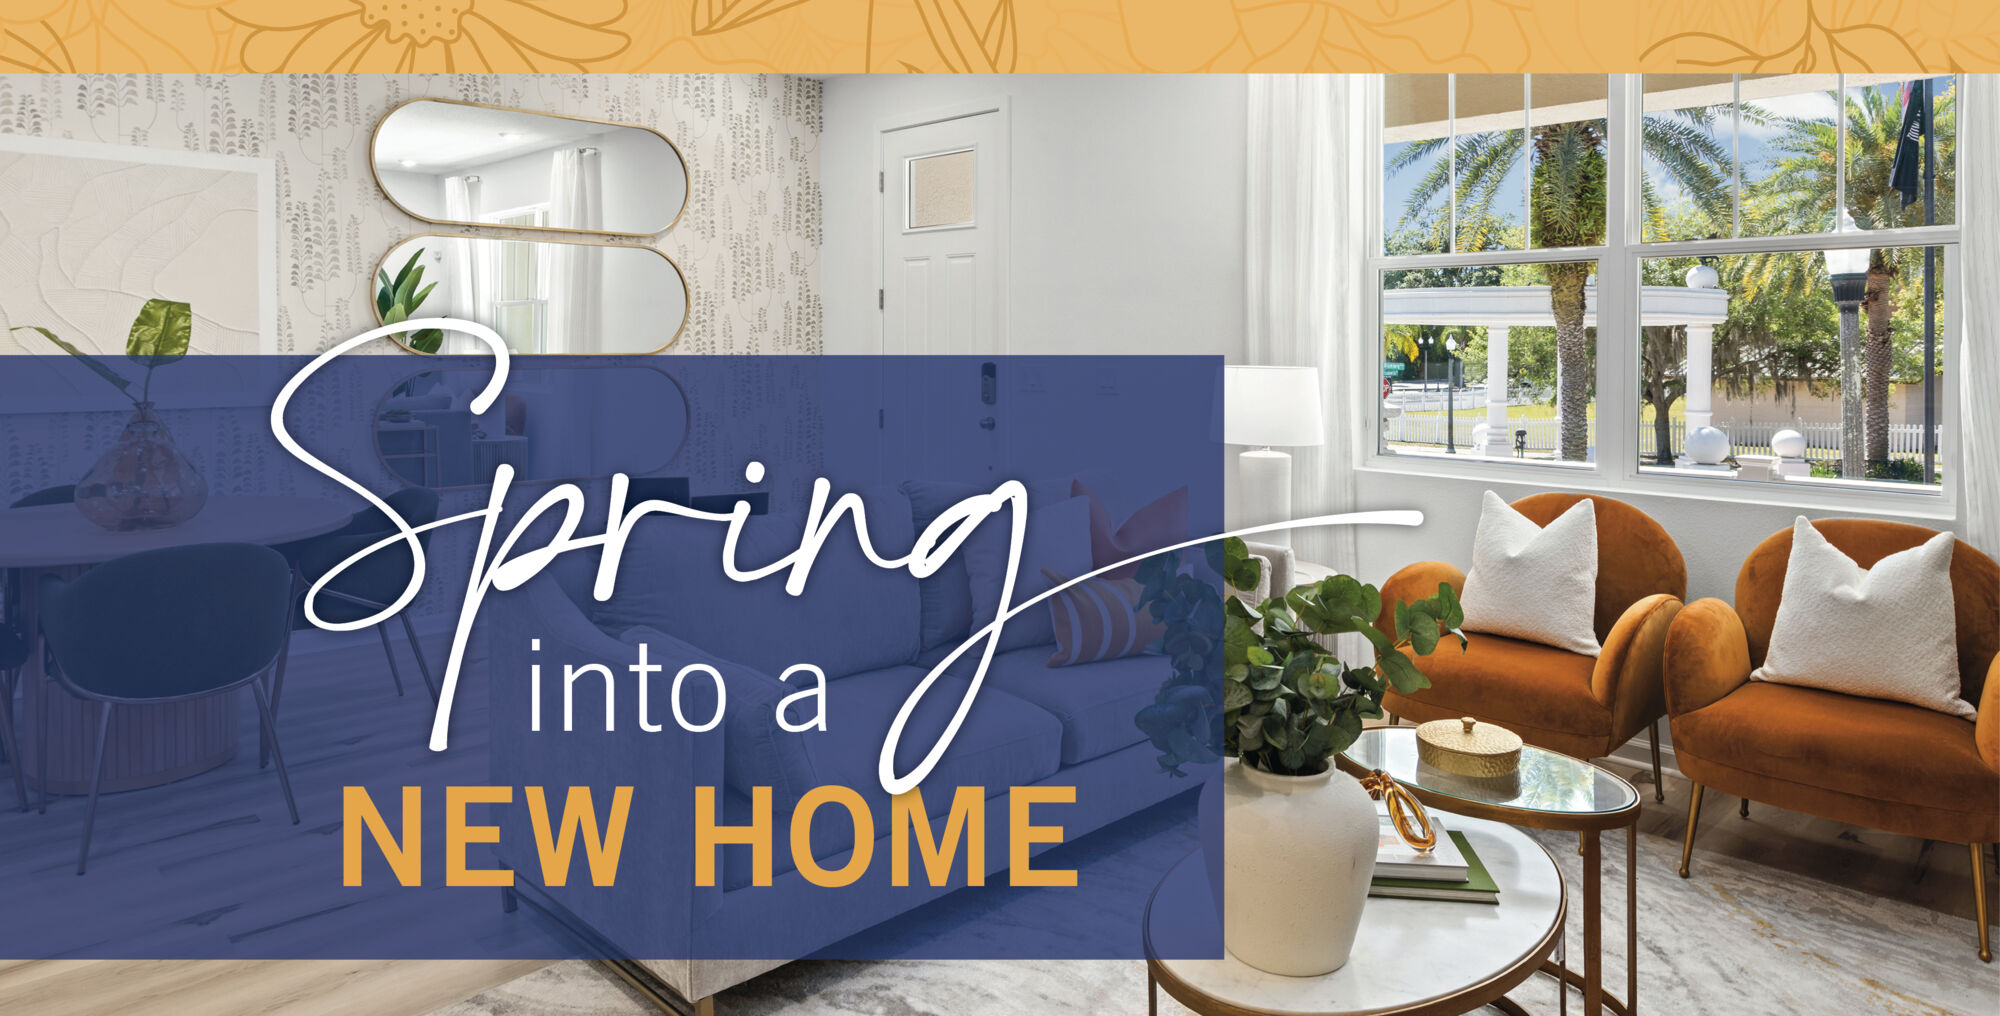 Spring into a new home